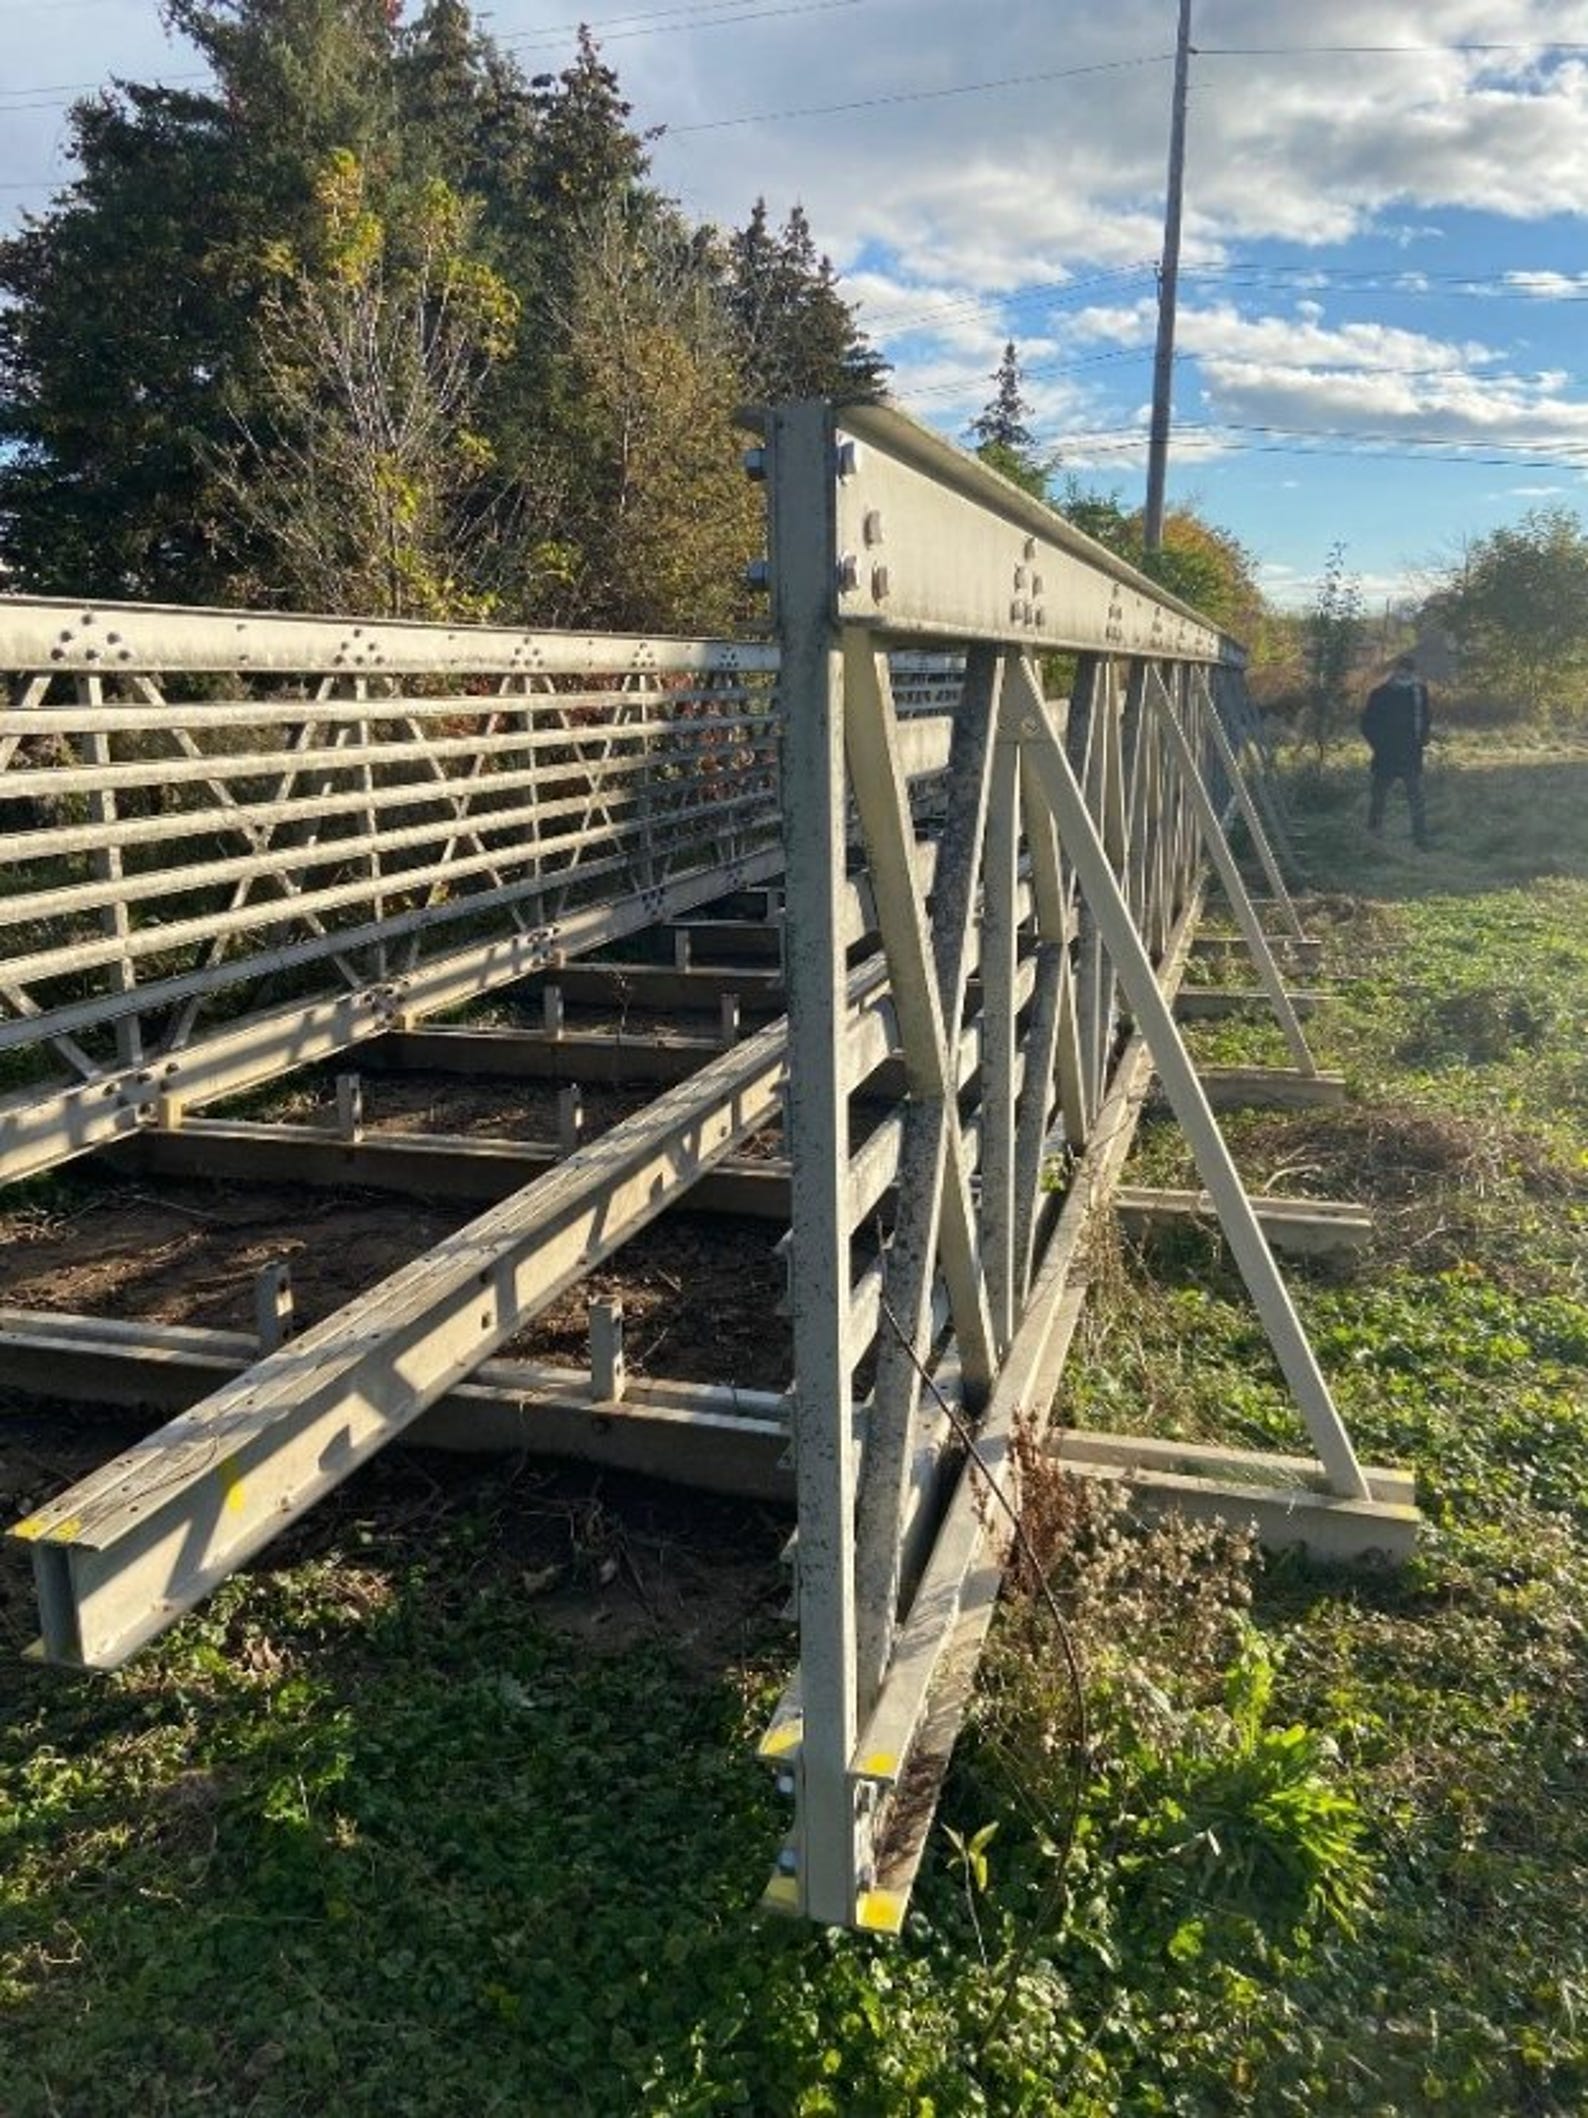 On Nov. 3, police said the city discovered someone had cleared brush from around this bridge, and took the treated wood deck boards.